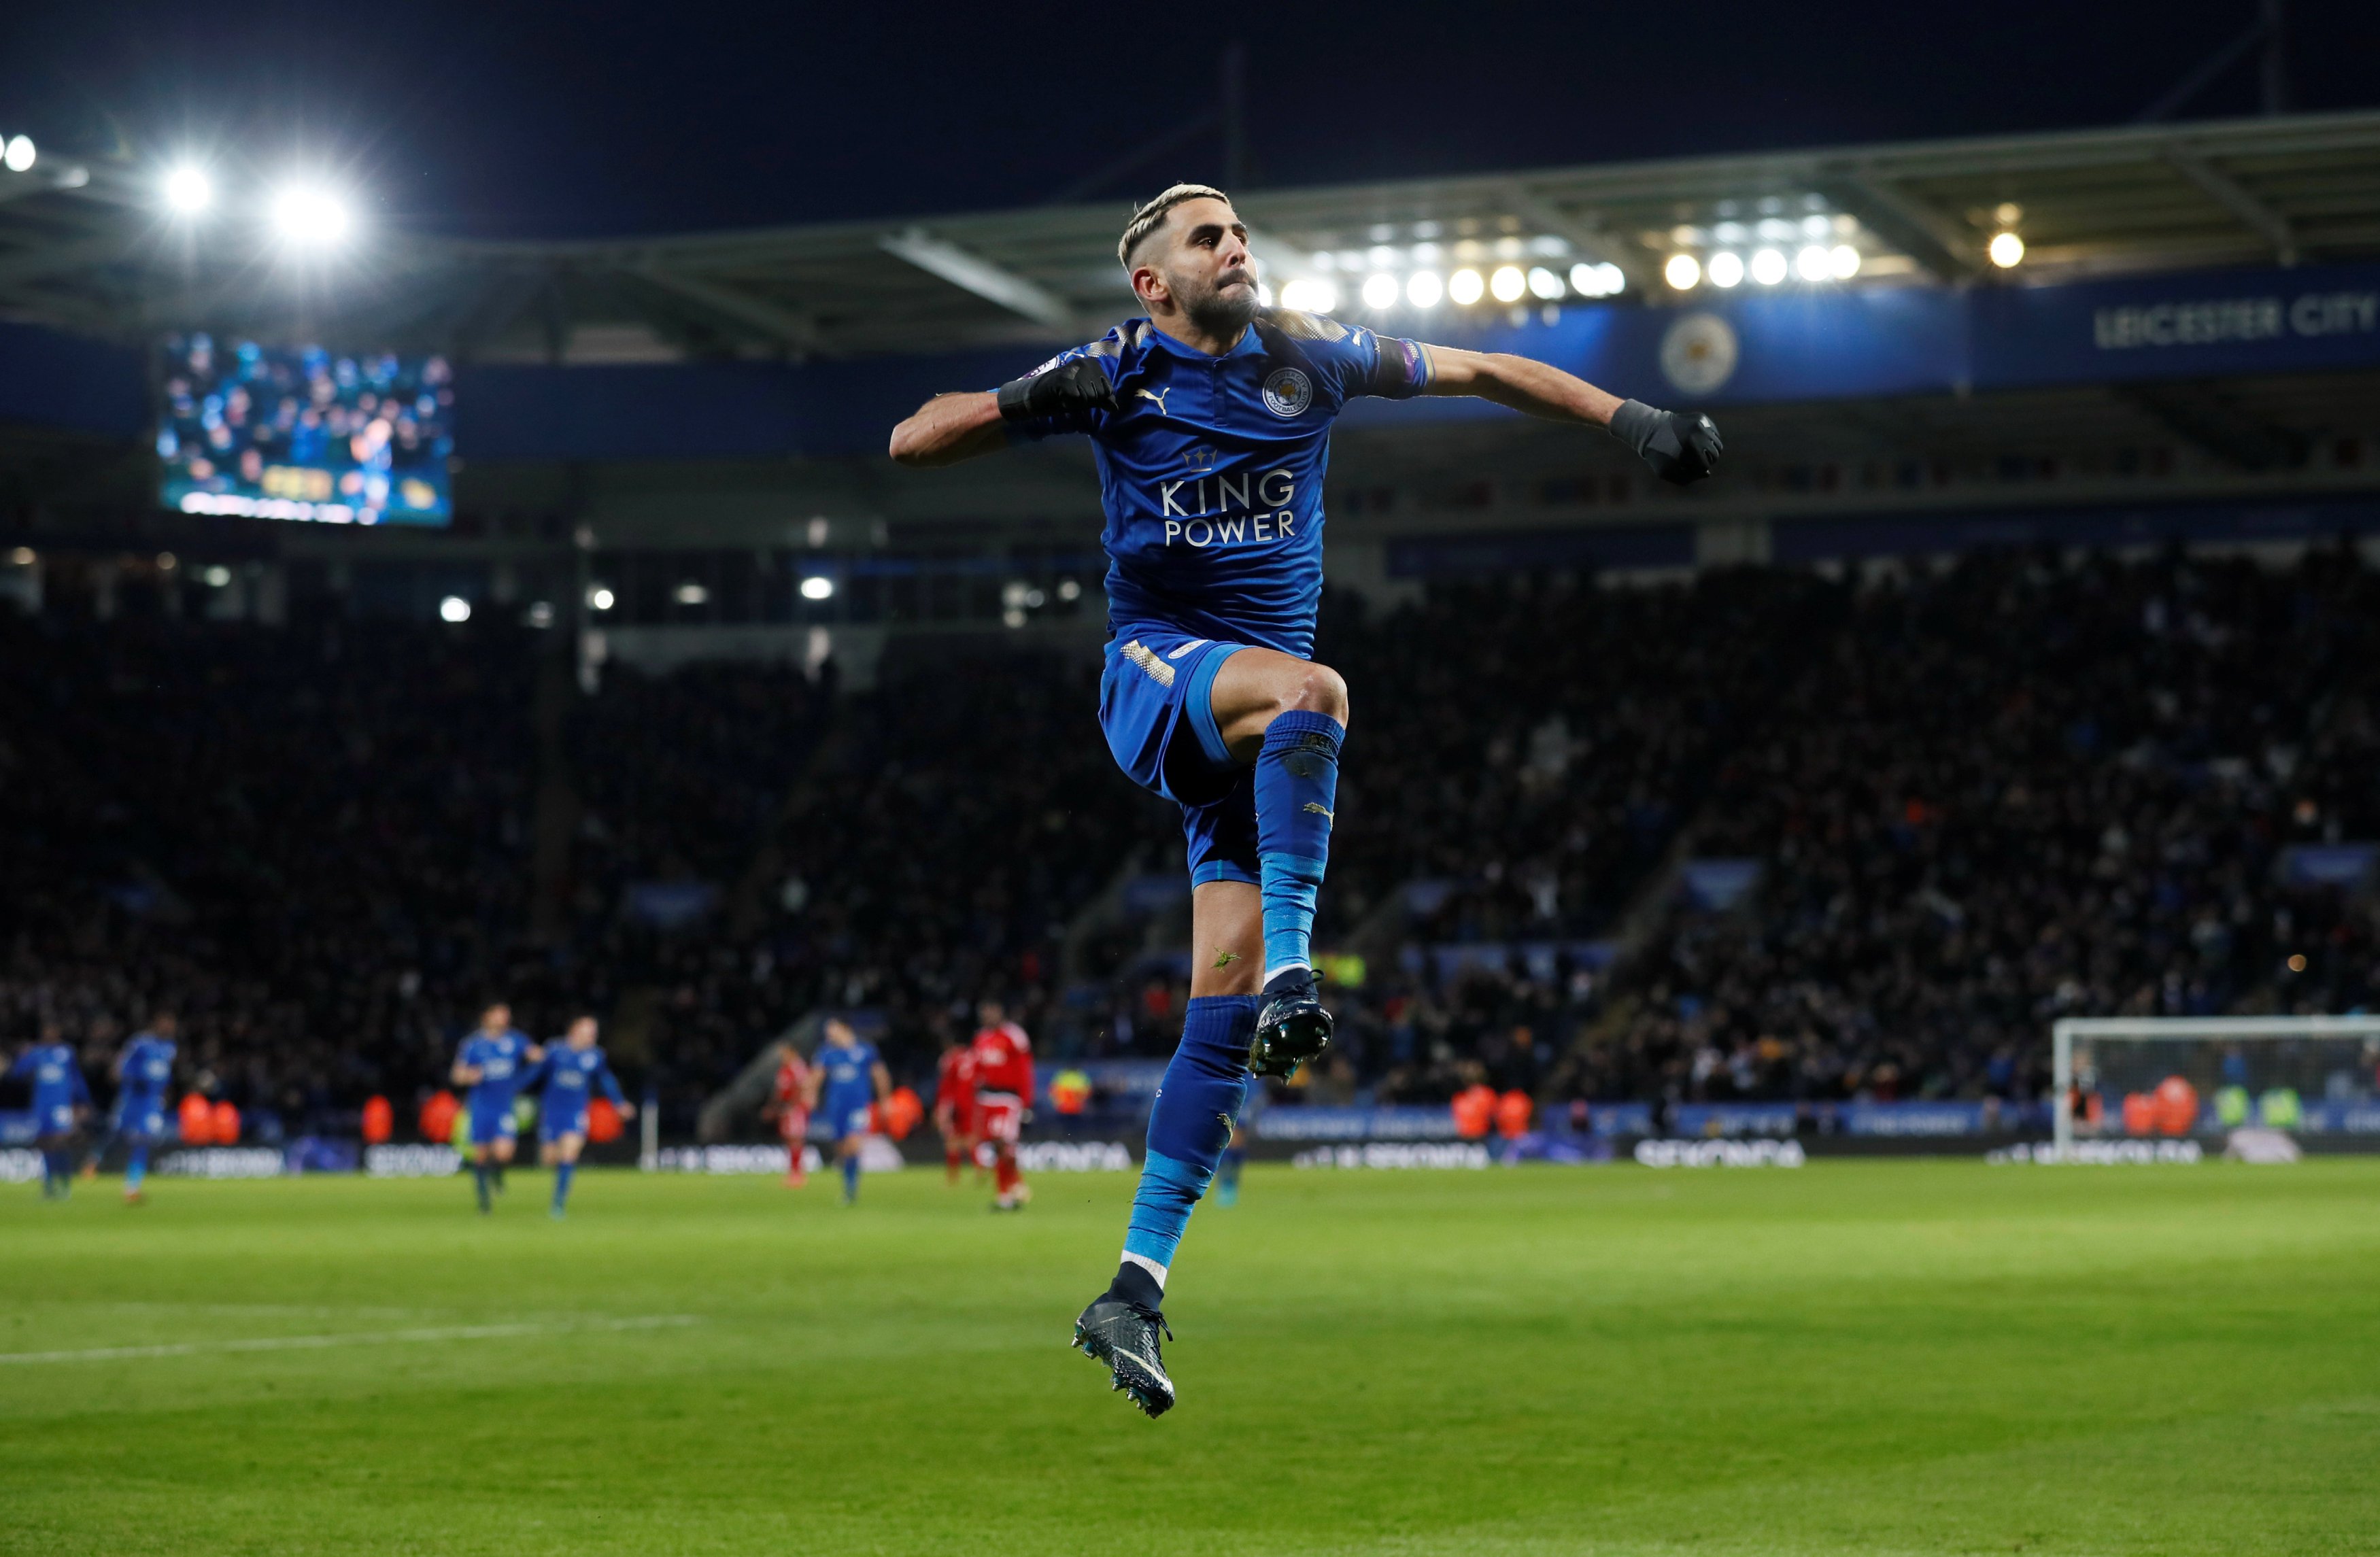 Leicester City 2-0 Watford: Three talking points from the King Power